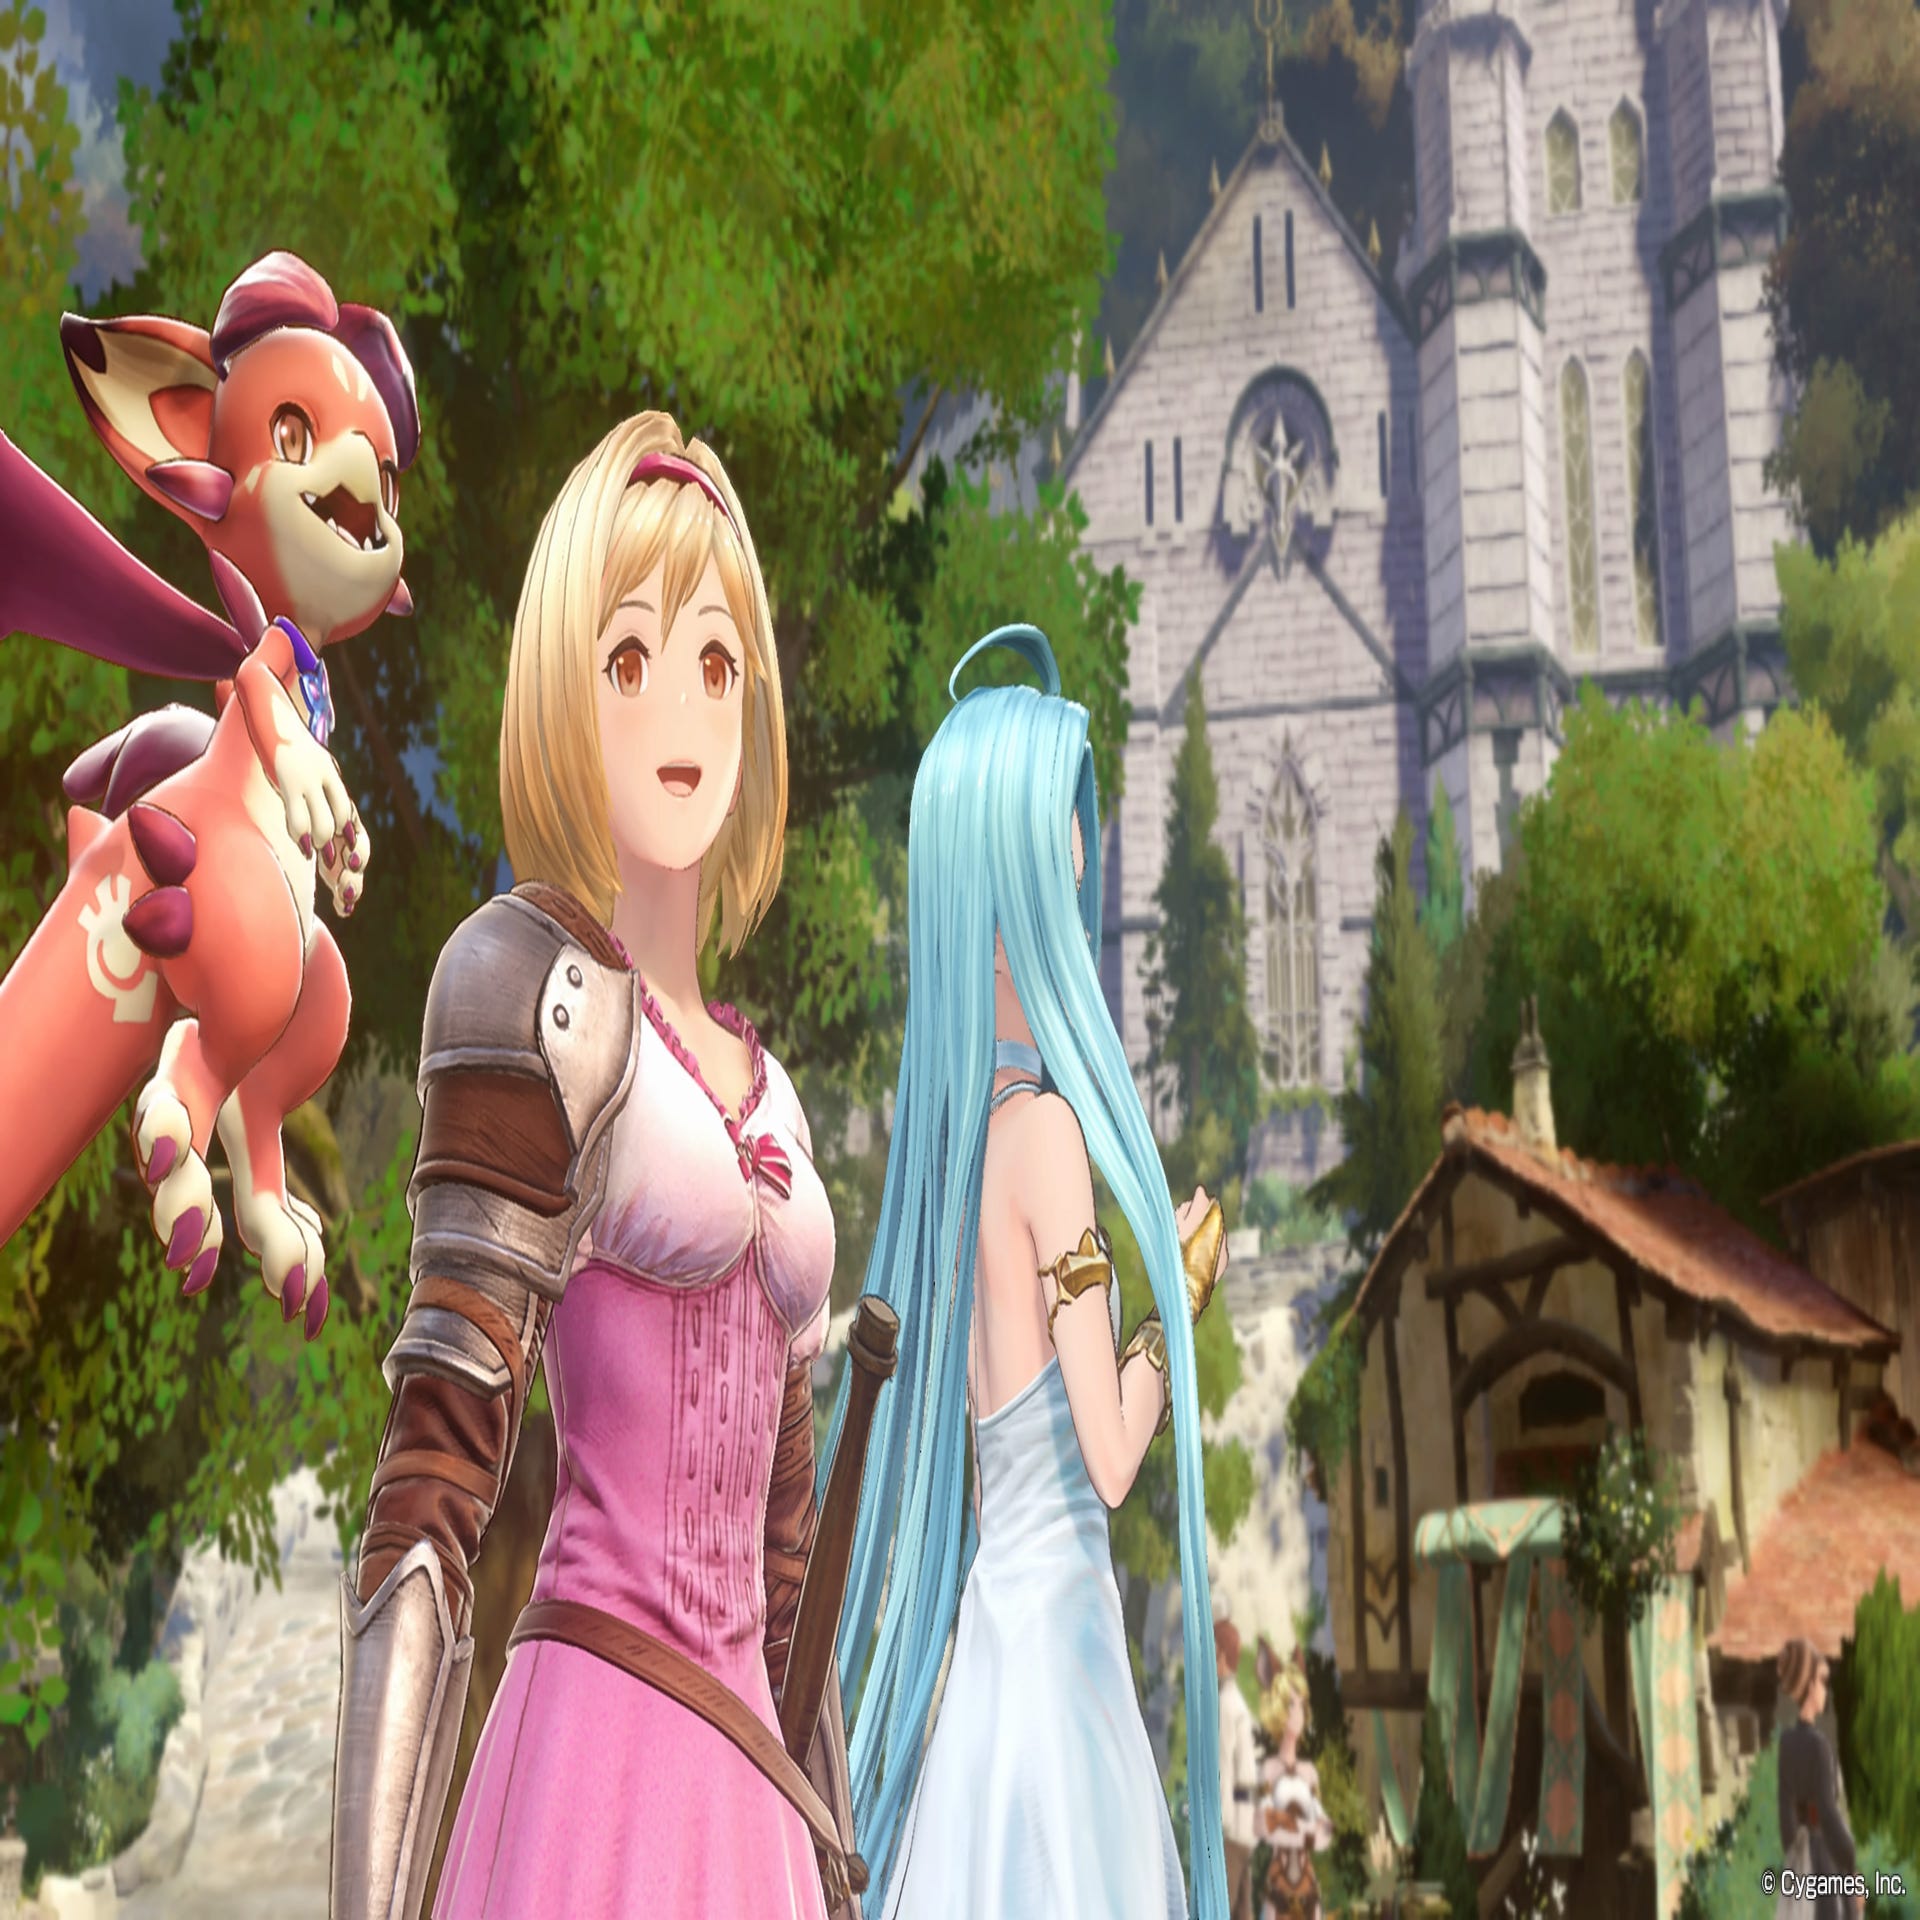 Granblue Fantasy: Relink review - great real-time combat drives this  action-RPG follow-up